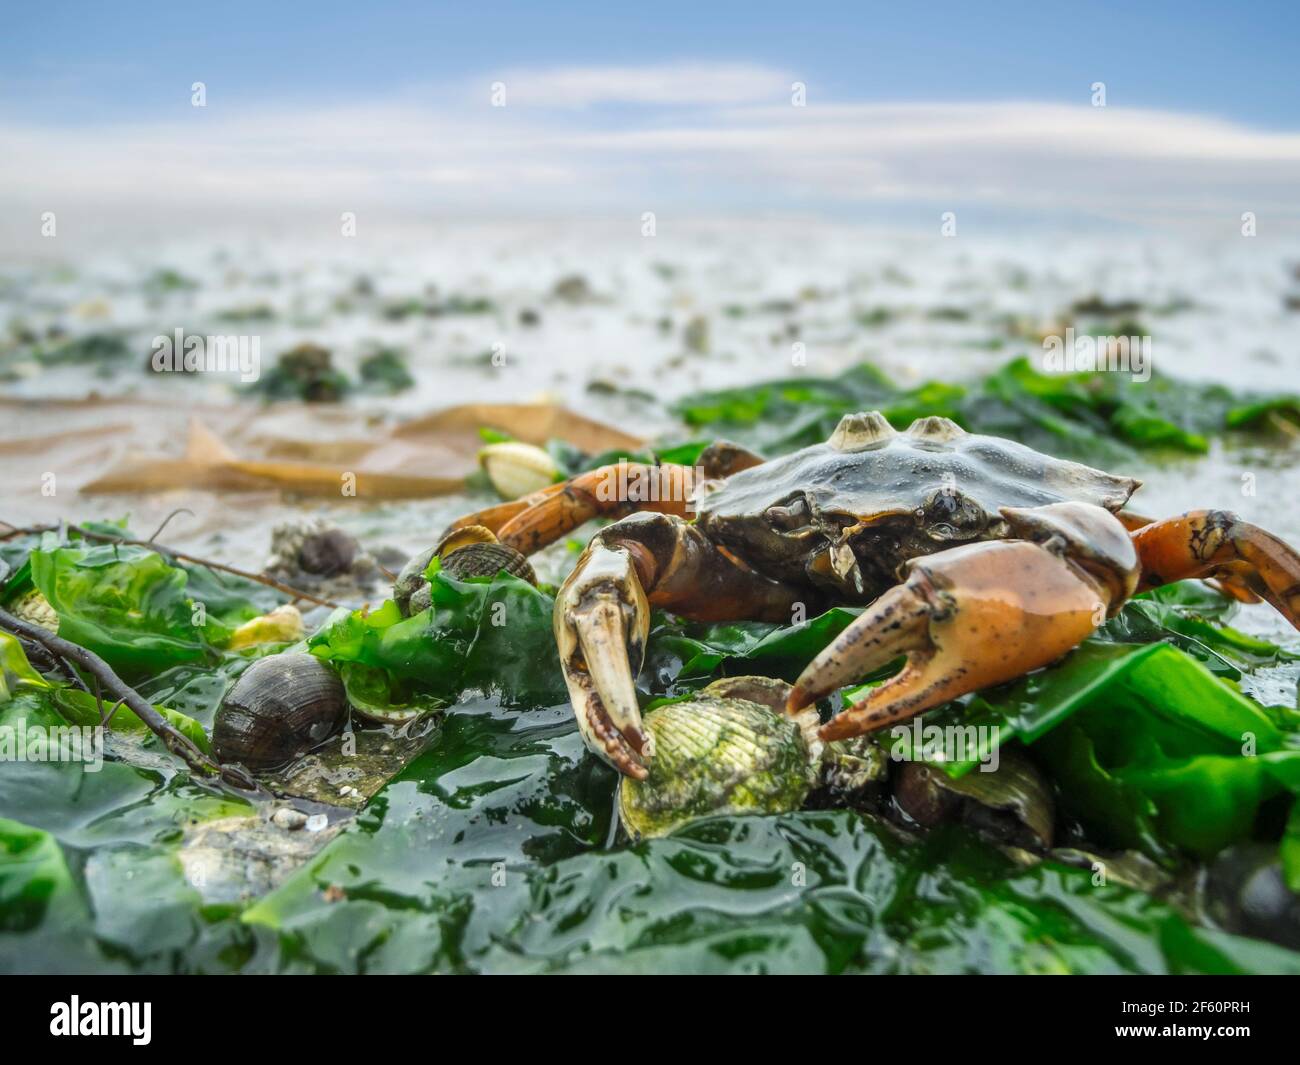 Low angle close-up of a common beach crab (Carcinus maenas) stranded lifeless on green seaweed in the north German Wadden Sea. Stock Photo